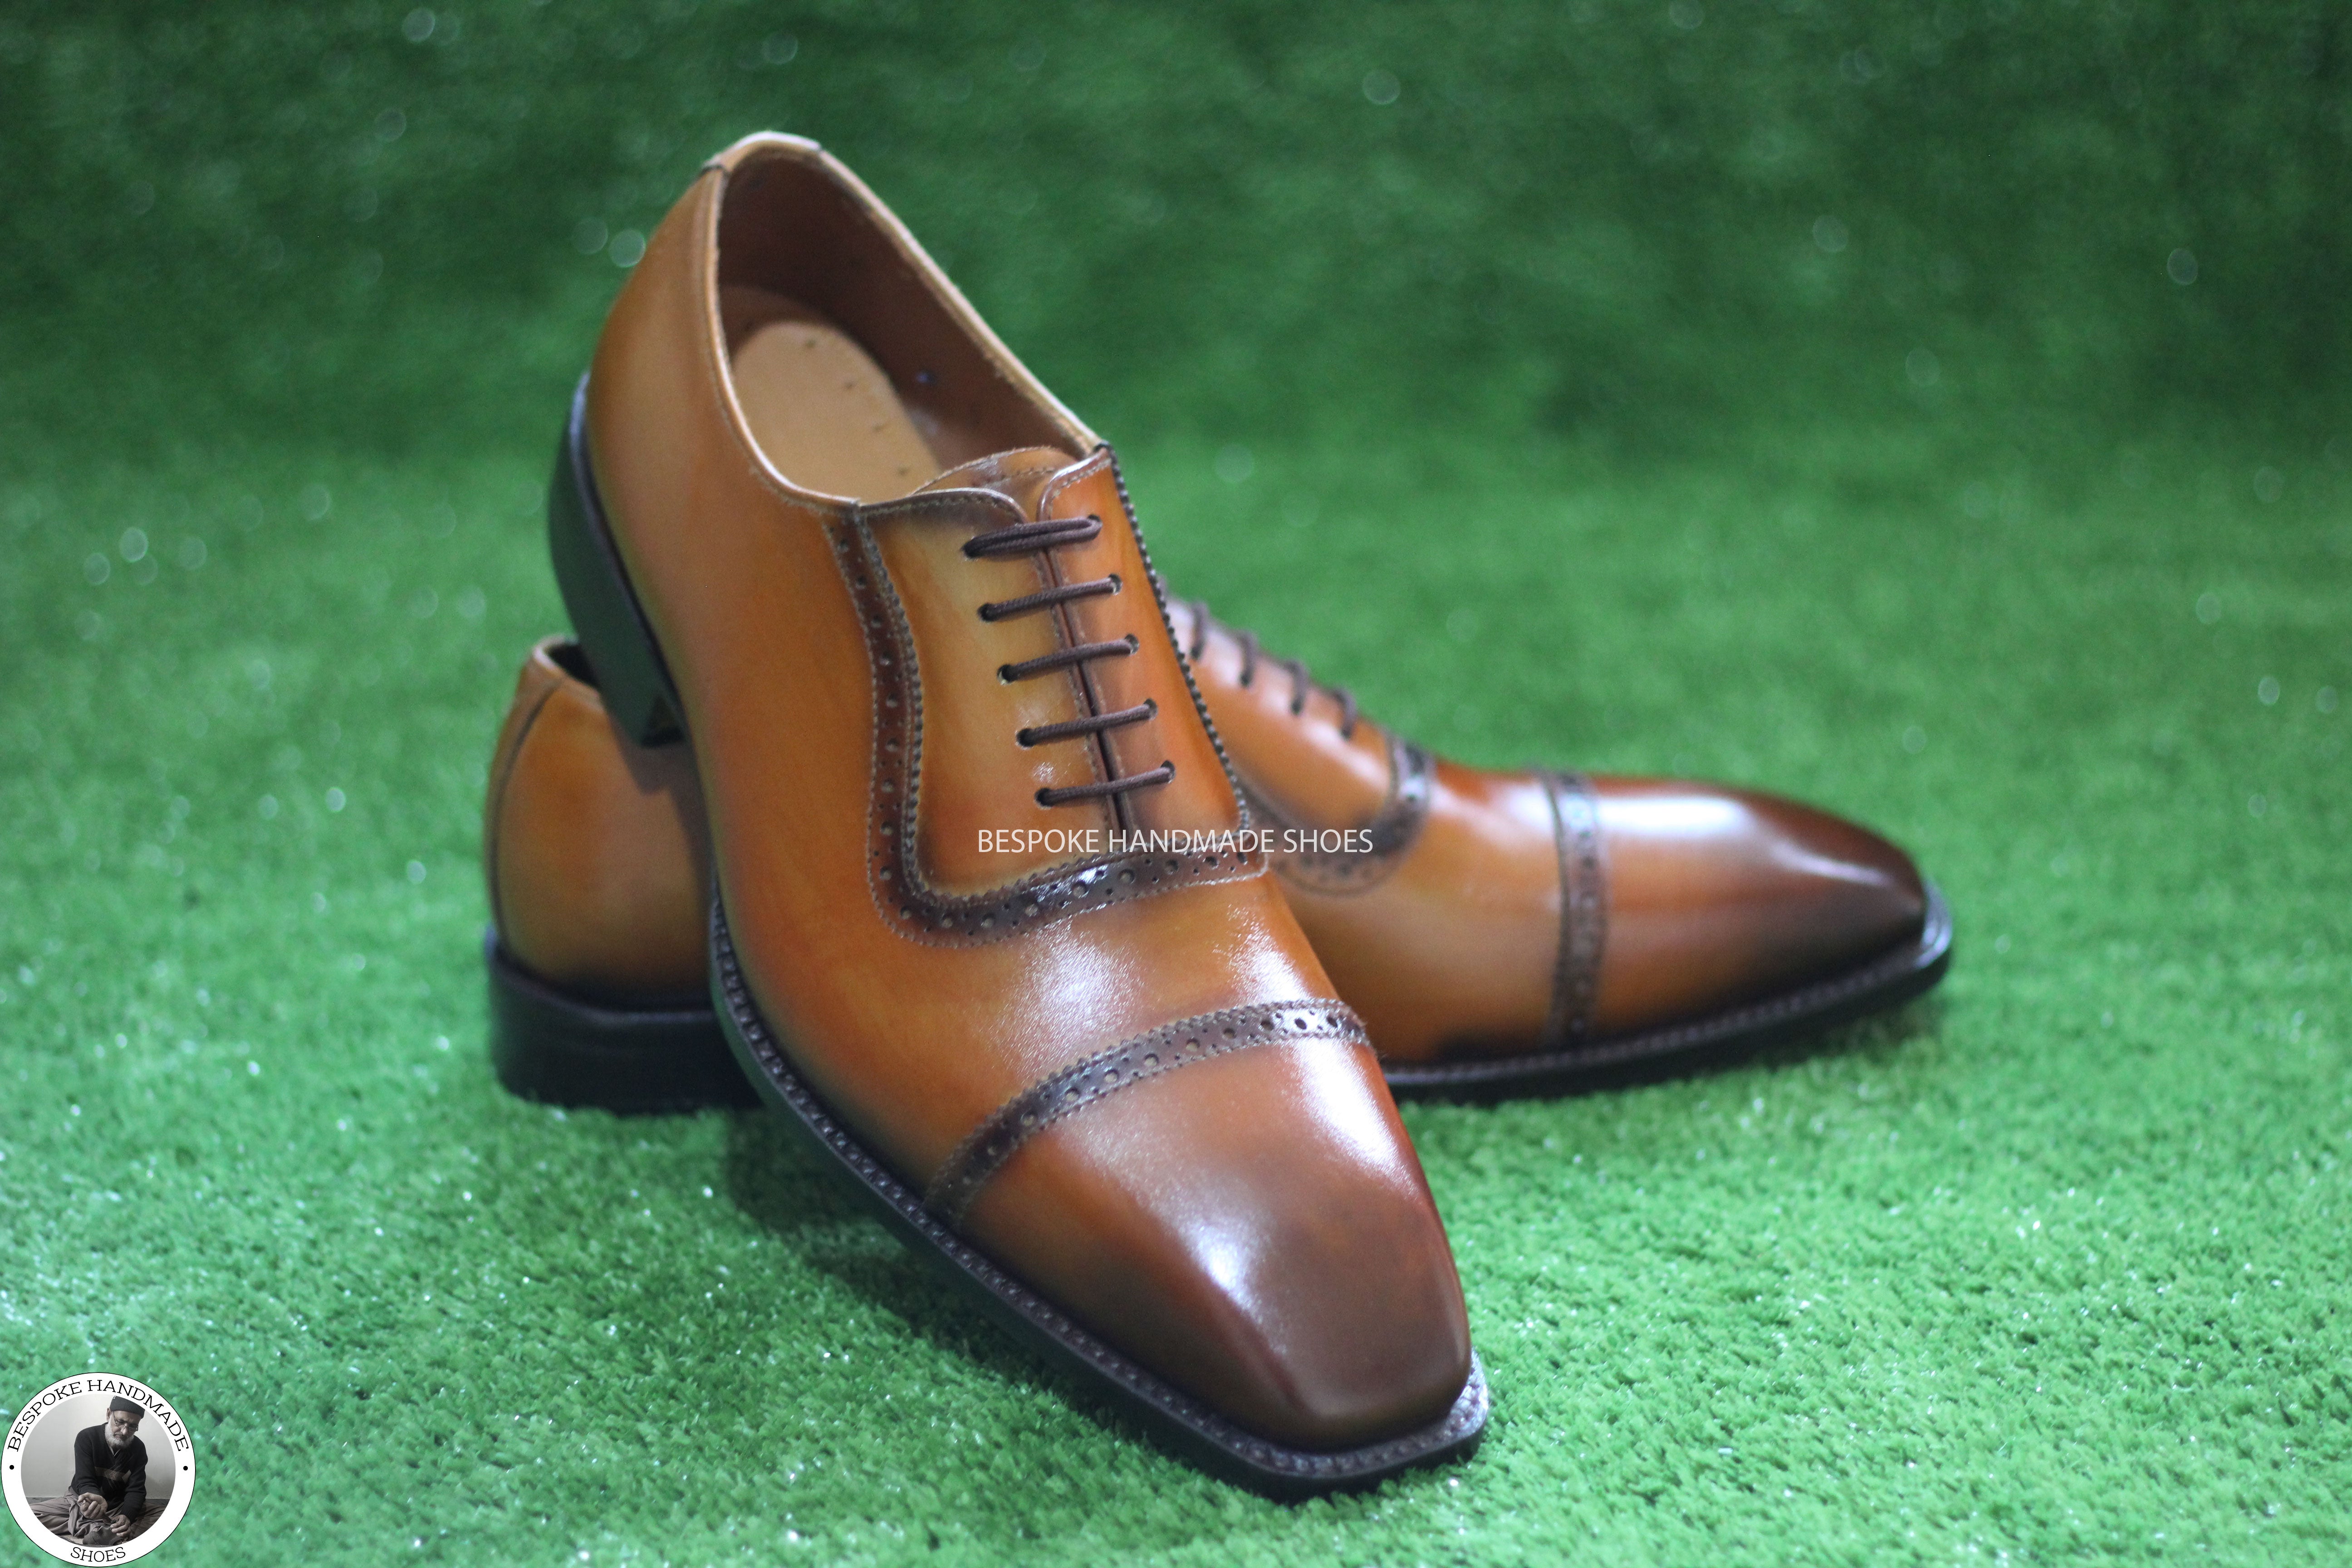 New Handcrafted Genuine Tan Leather Bit Black Shaded Oxford Toe Cap Lace Up Dress, Formal Shoes for Men's